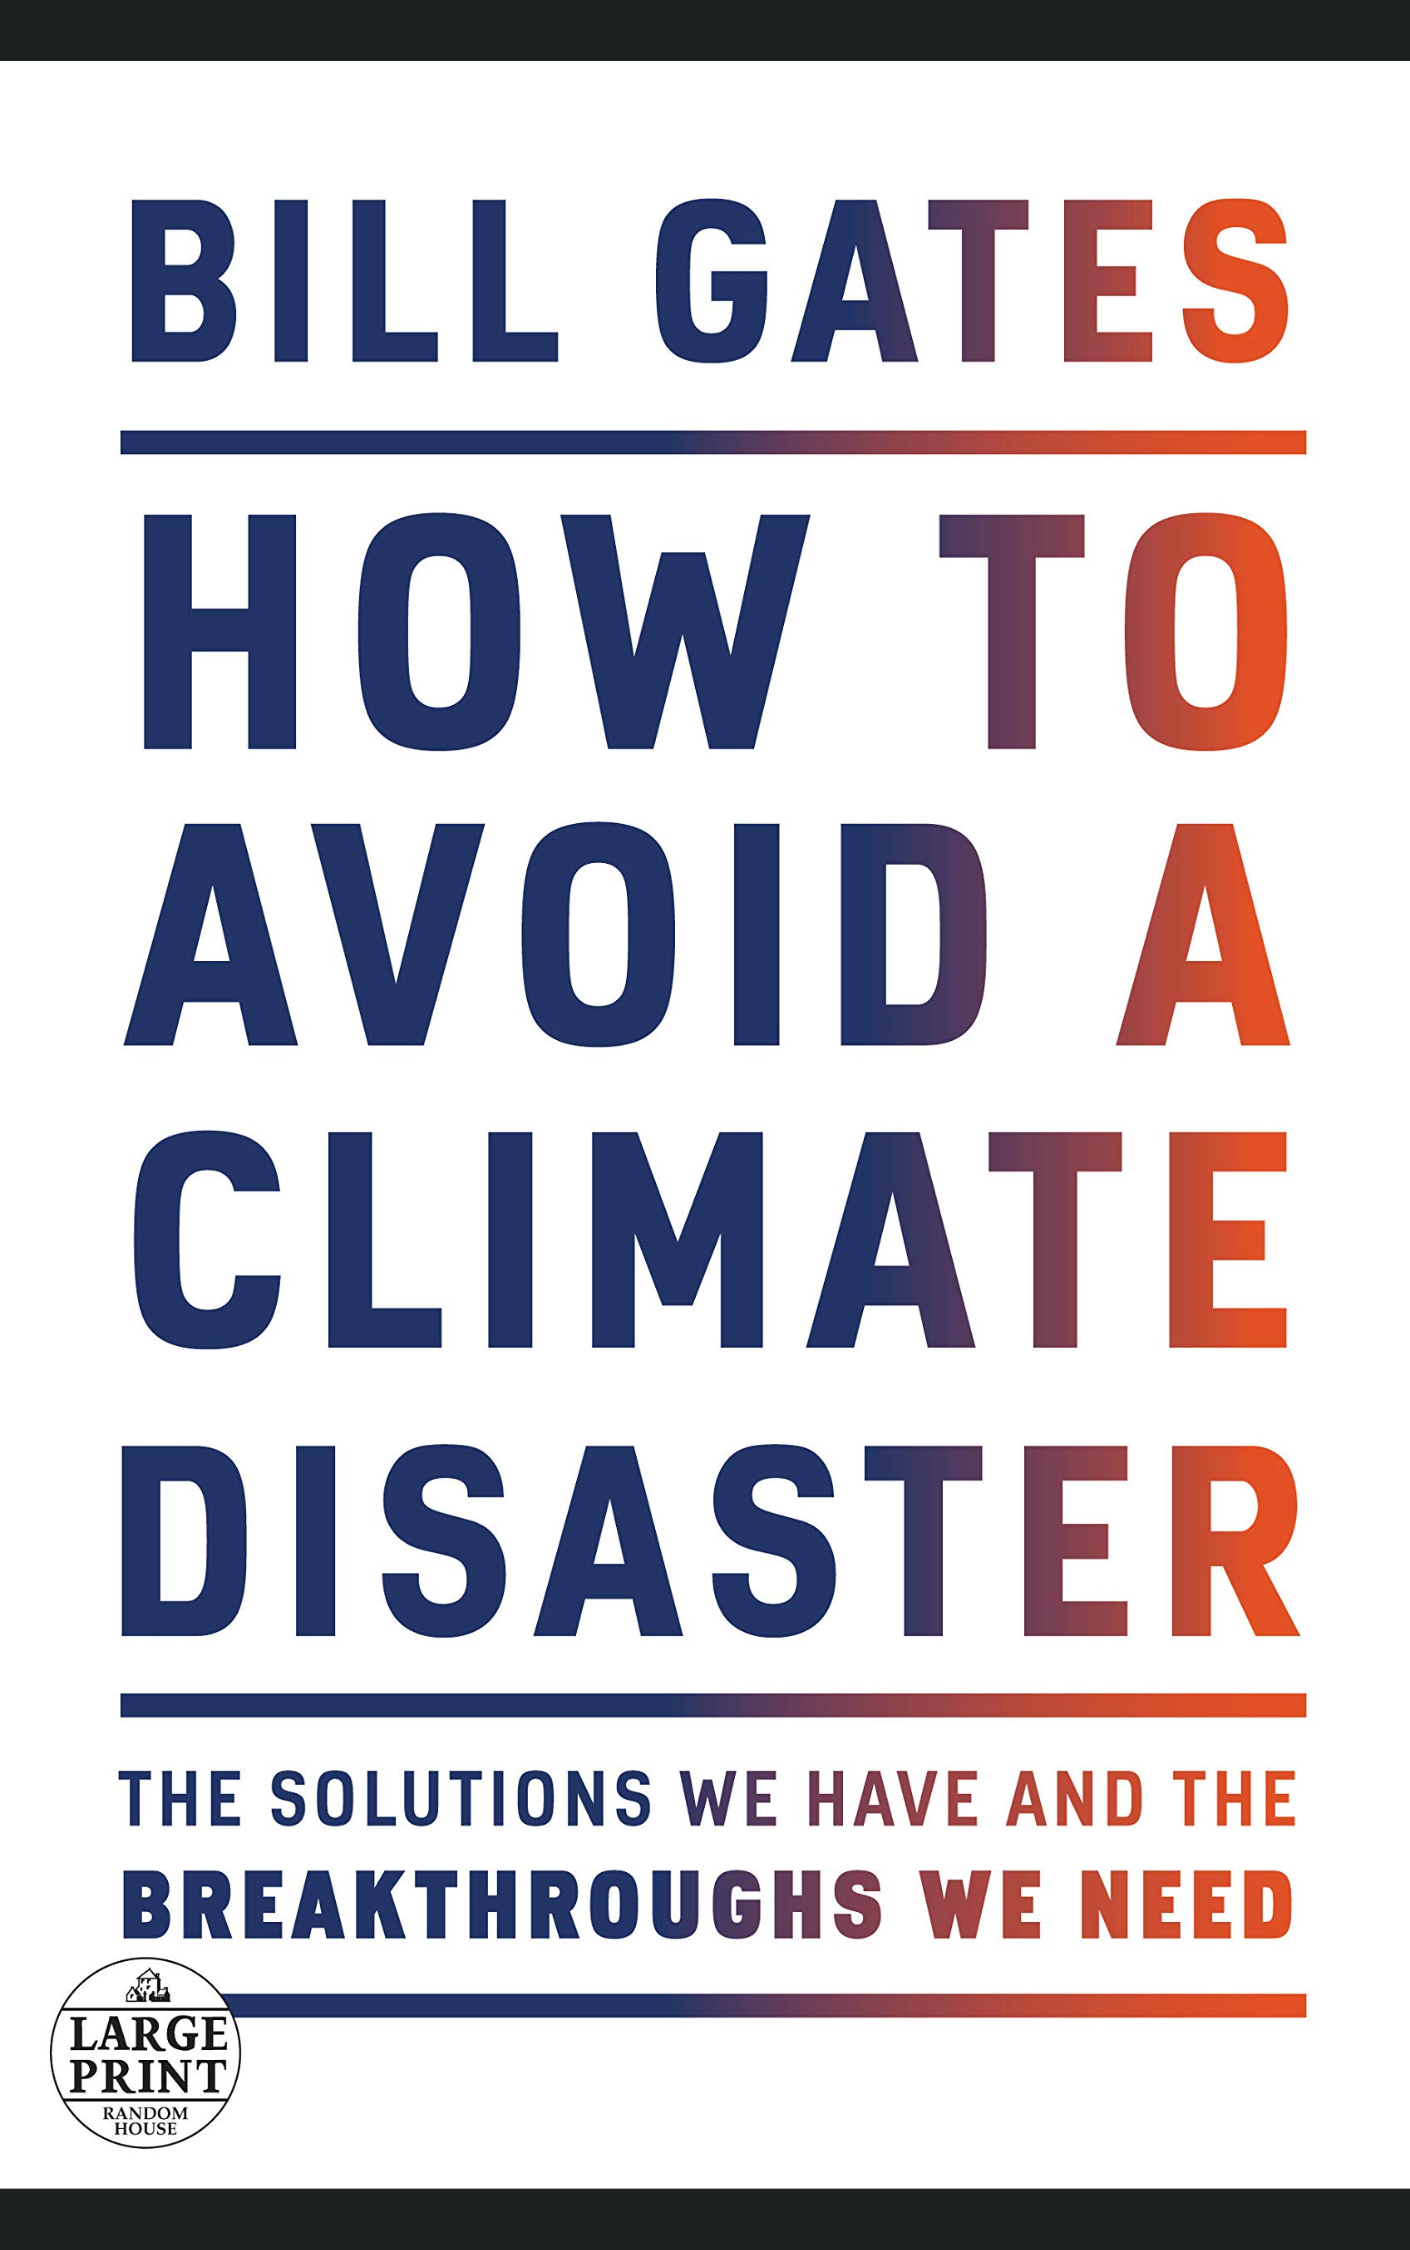 HOW TO AVOID A CLIMATE DISASTER by BILL GATES